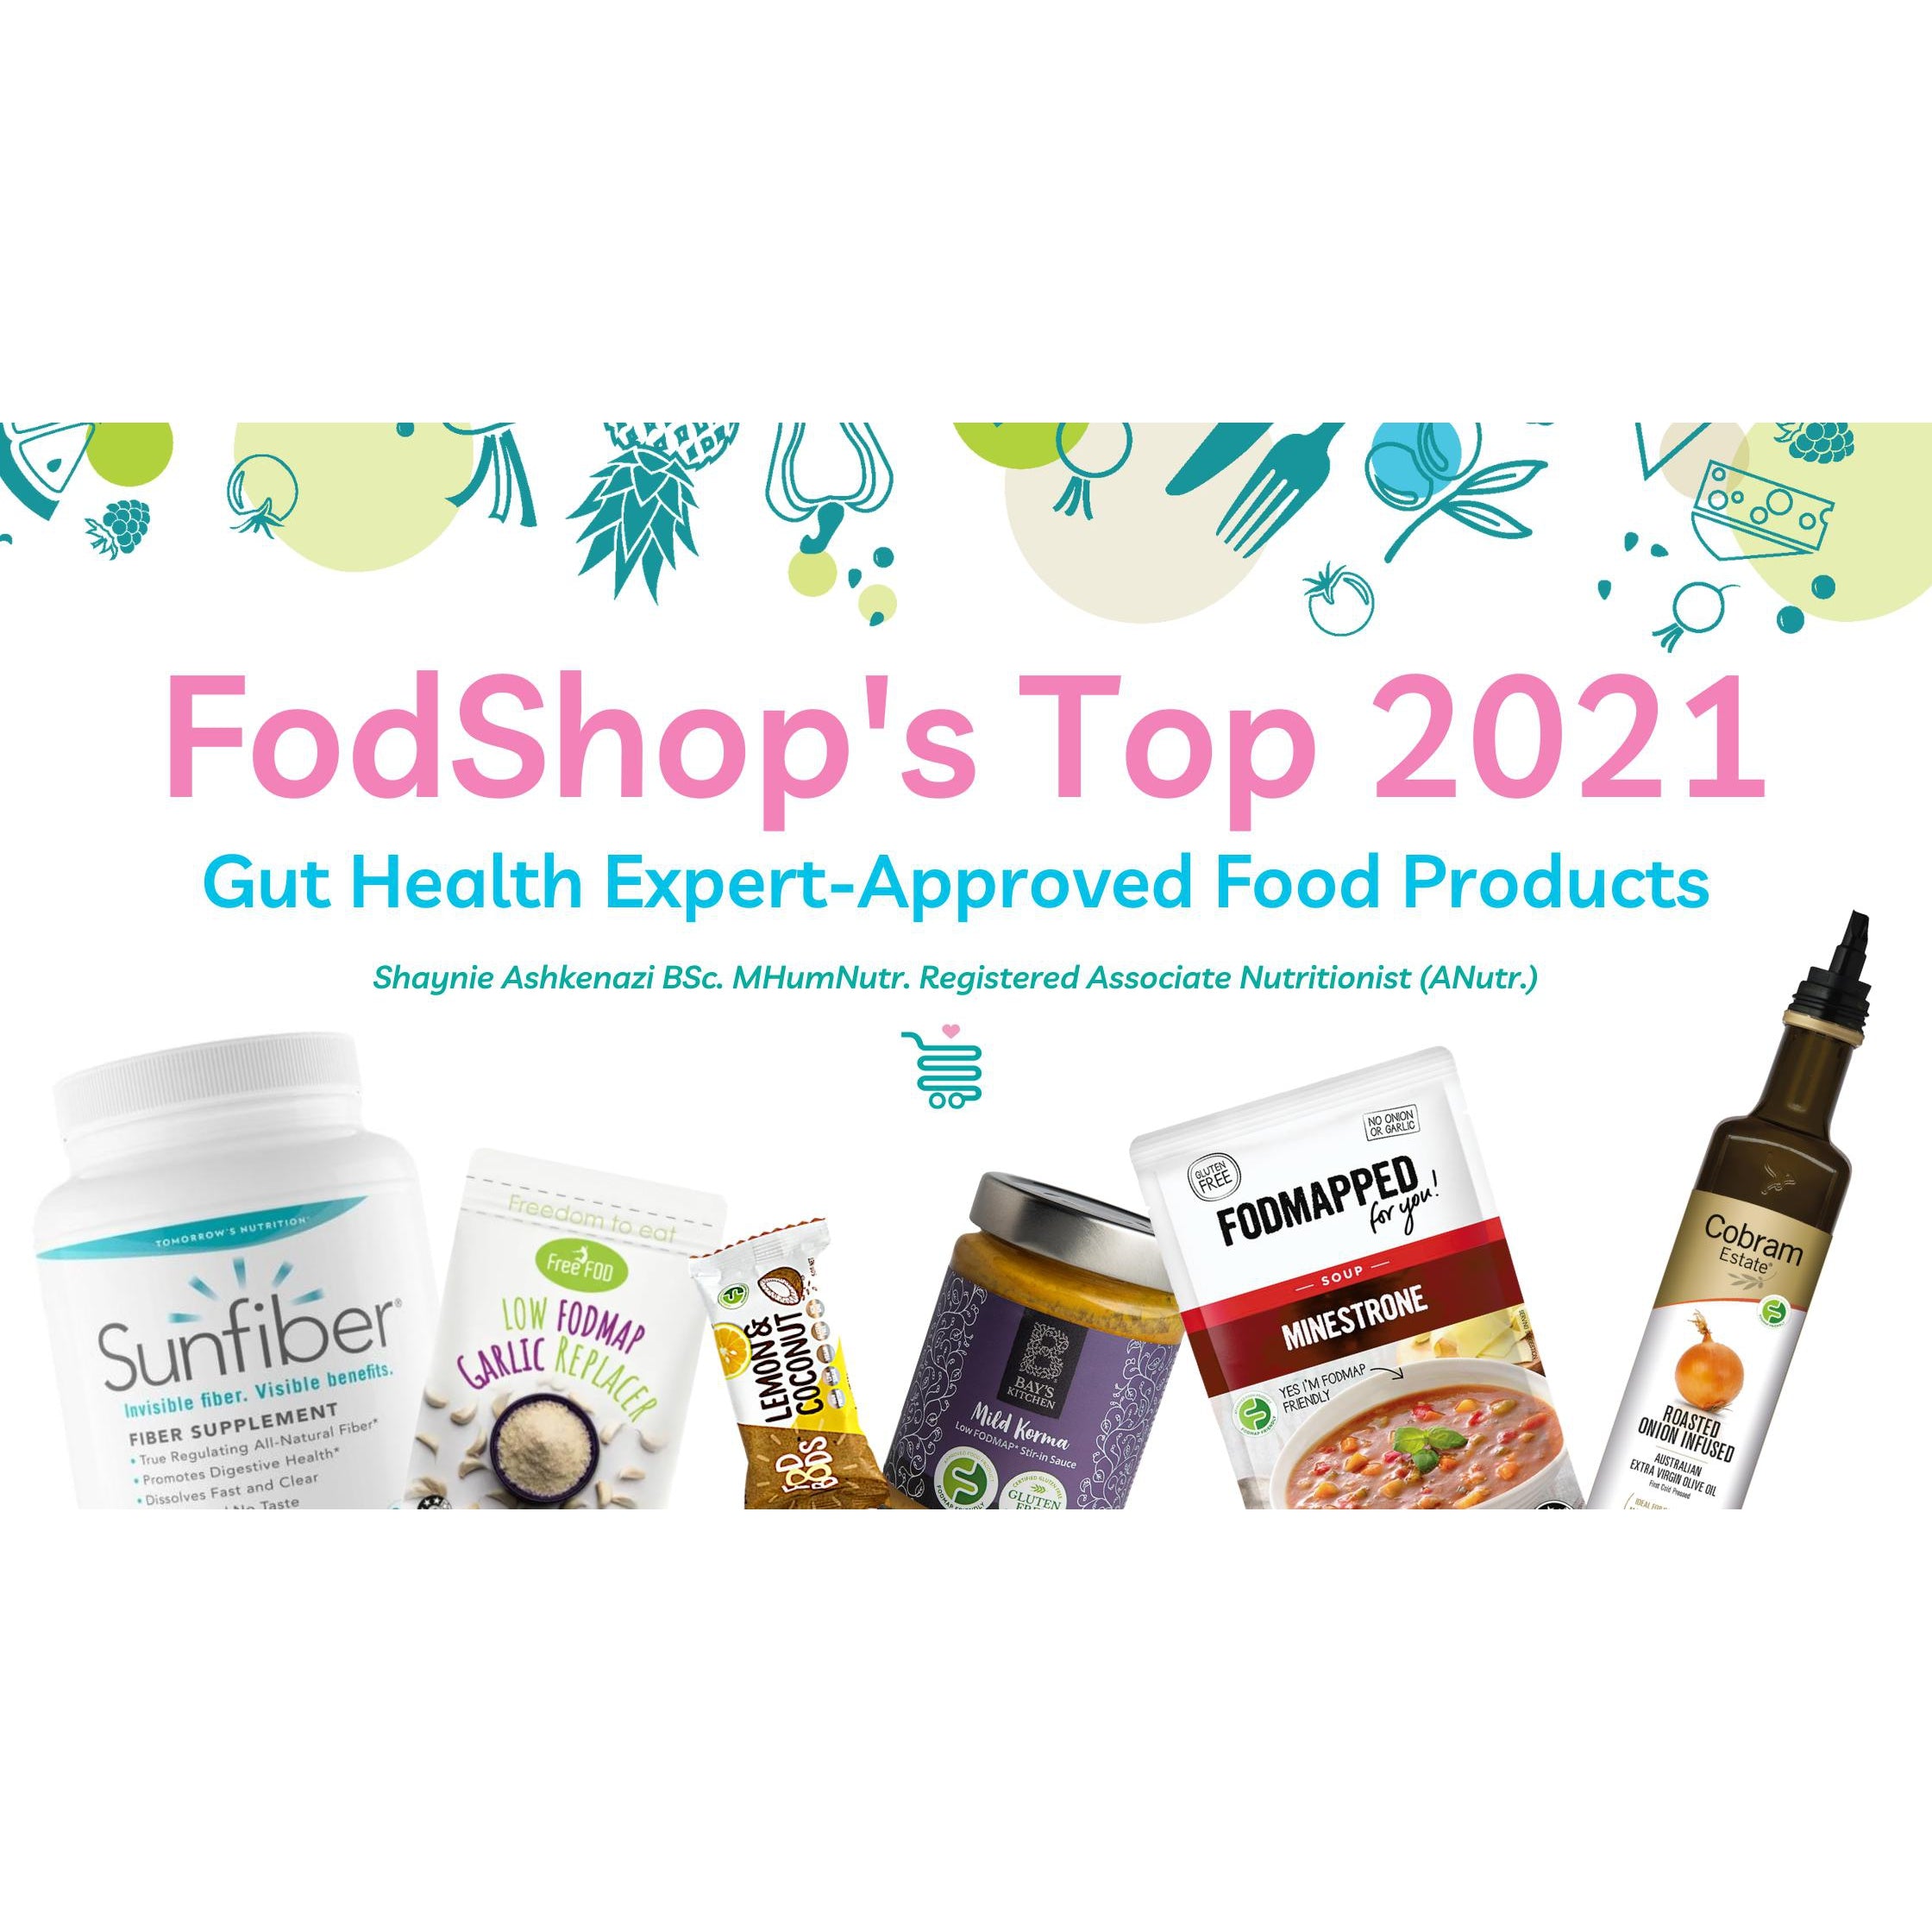 FodShop's Top Dietitian-Approved Low FODMAP Food Products for 2021